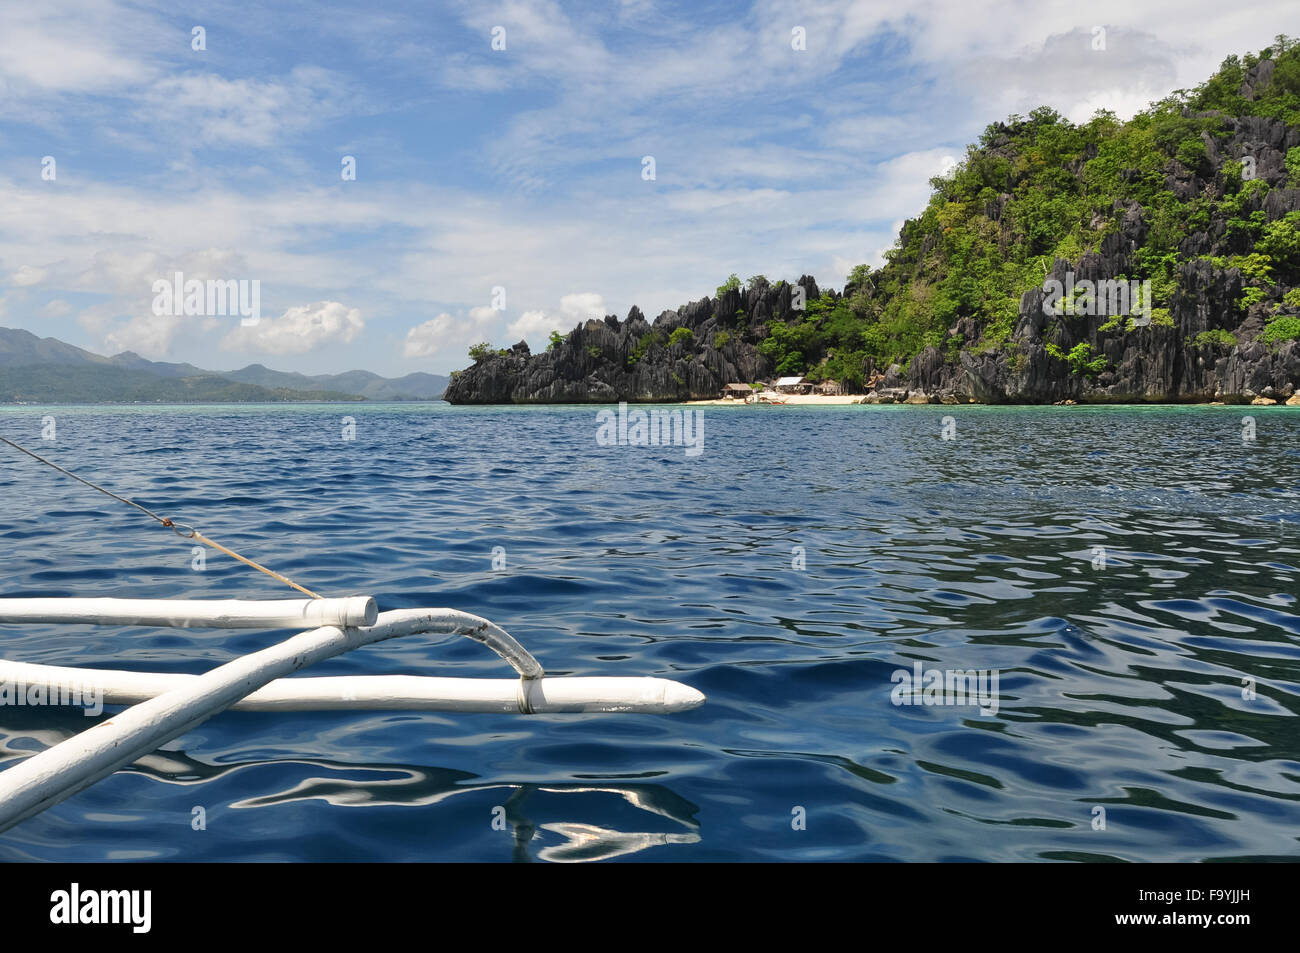 Side of a wooden filipino boat Facing the blue ocean and sky with clouds Stock Photo